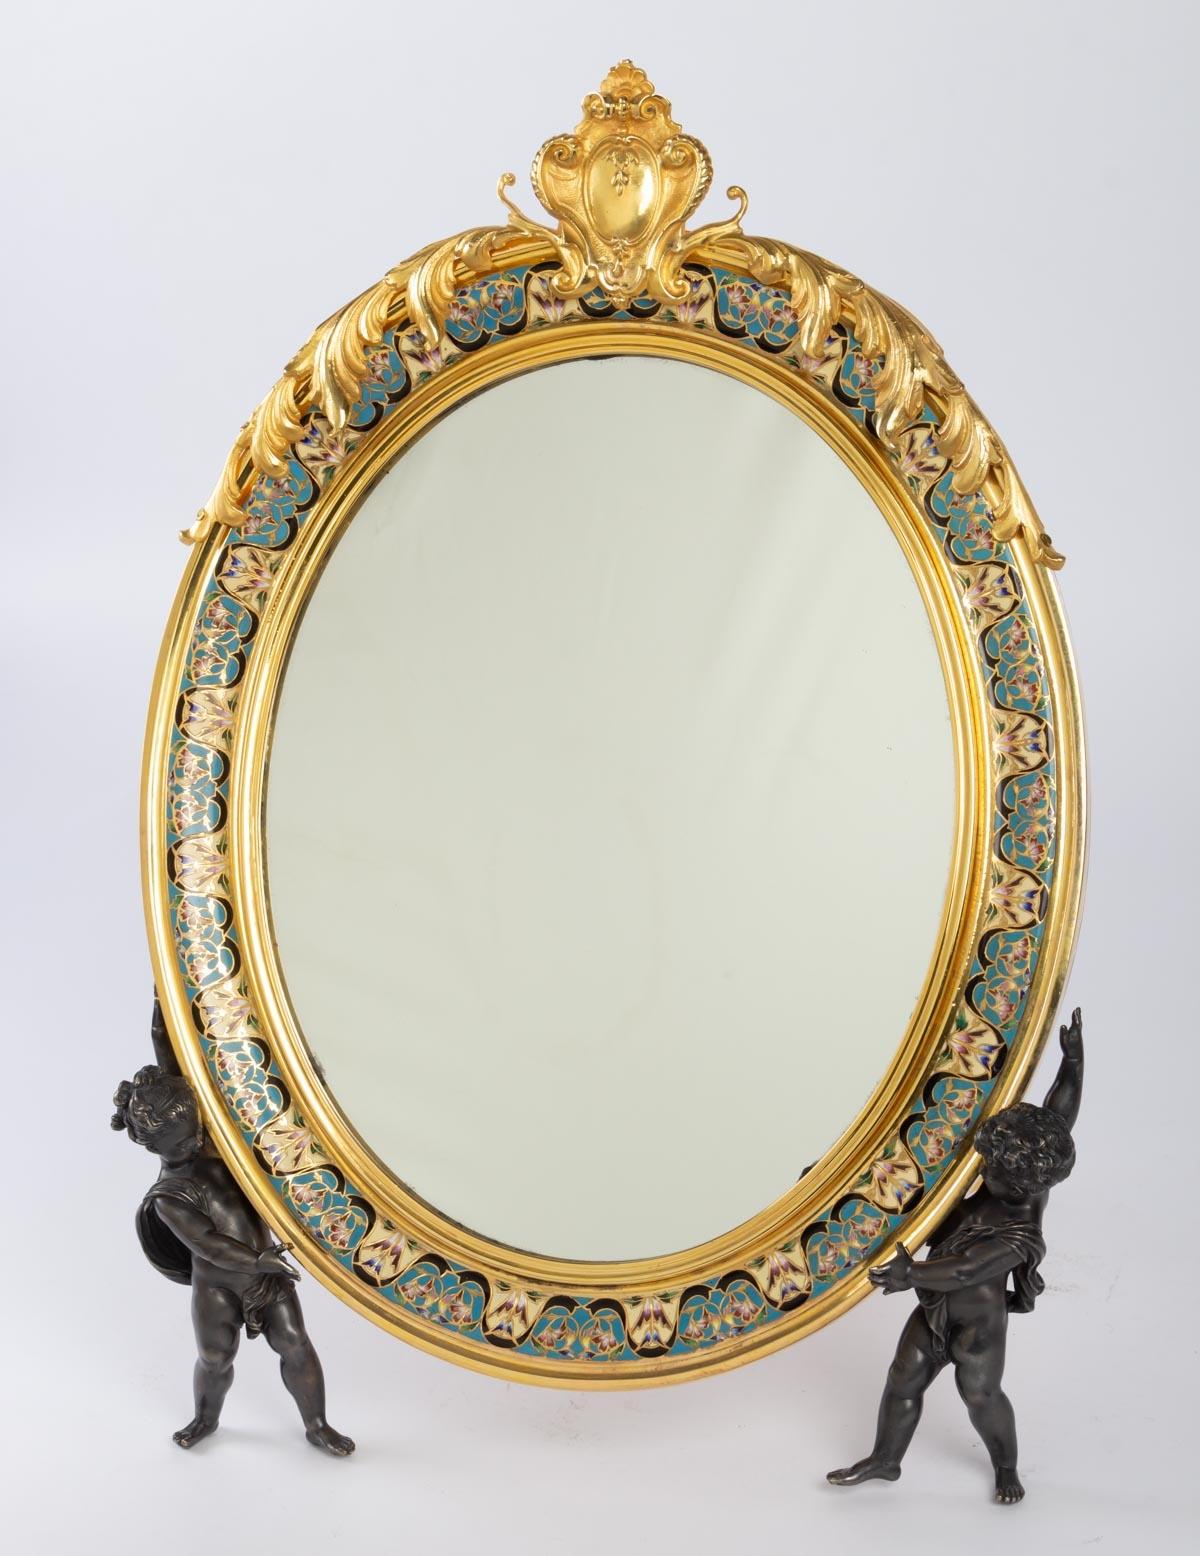 Important 19th century toilet mirror, Napoleon III, bronze and cloisonné enamels, supported by two small cherubs, the openwork pediment decorated with a rocaille cartouche framed by a garland of flowers.
Late 19th century, Napoleon III